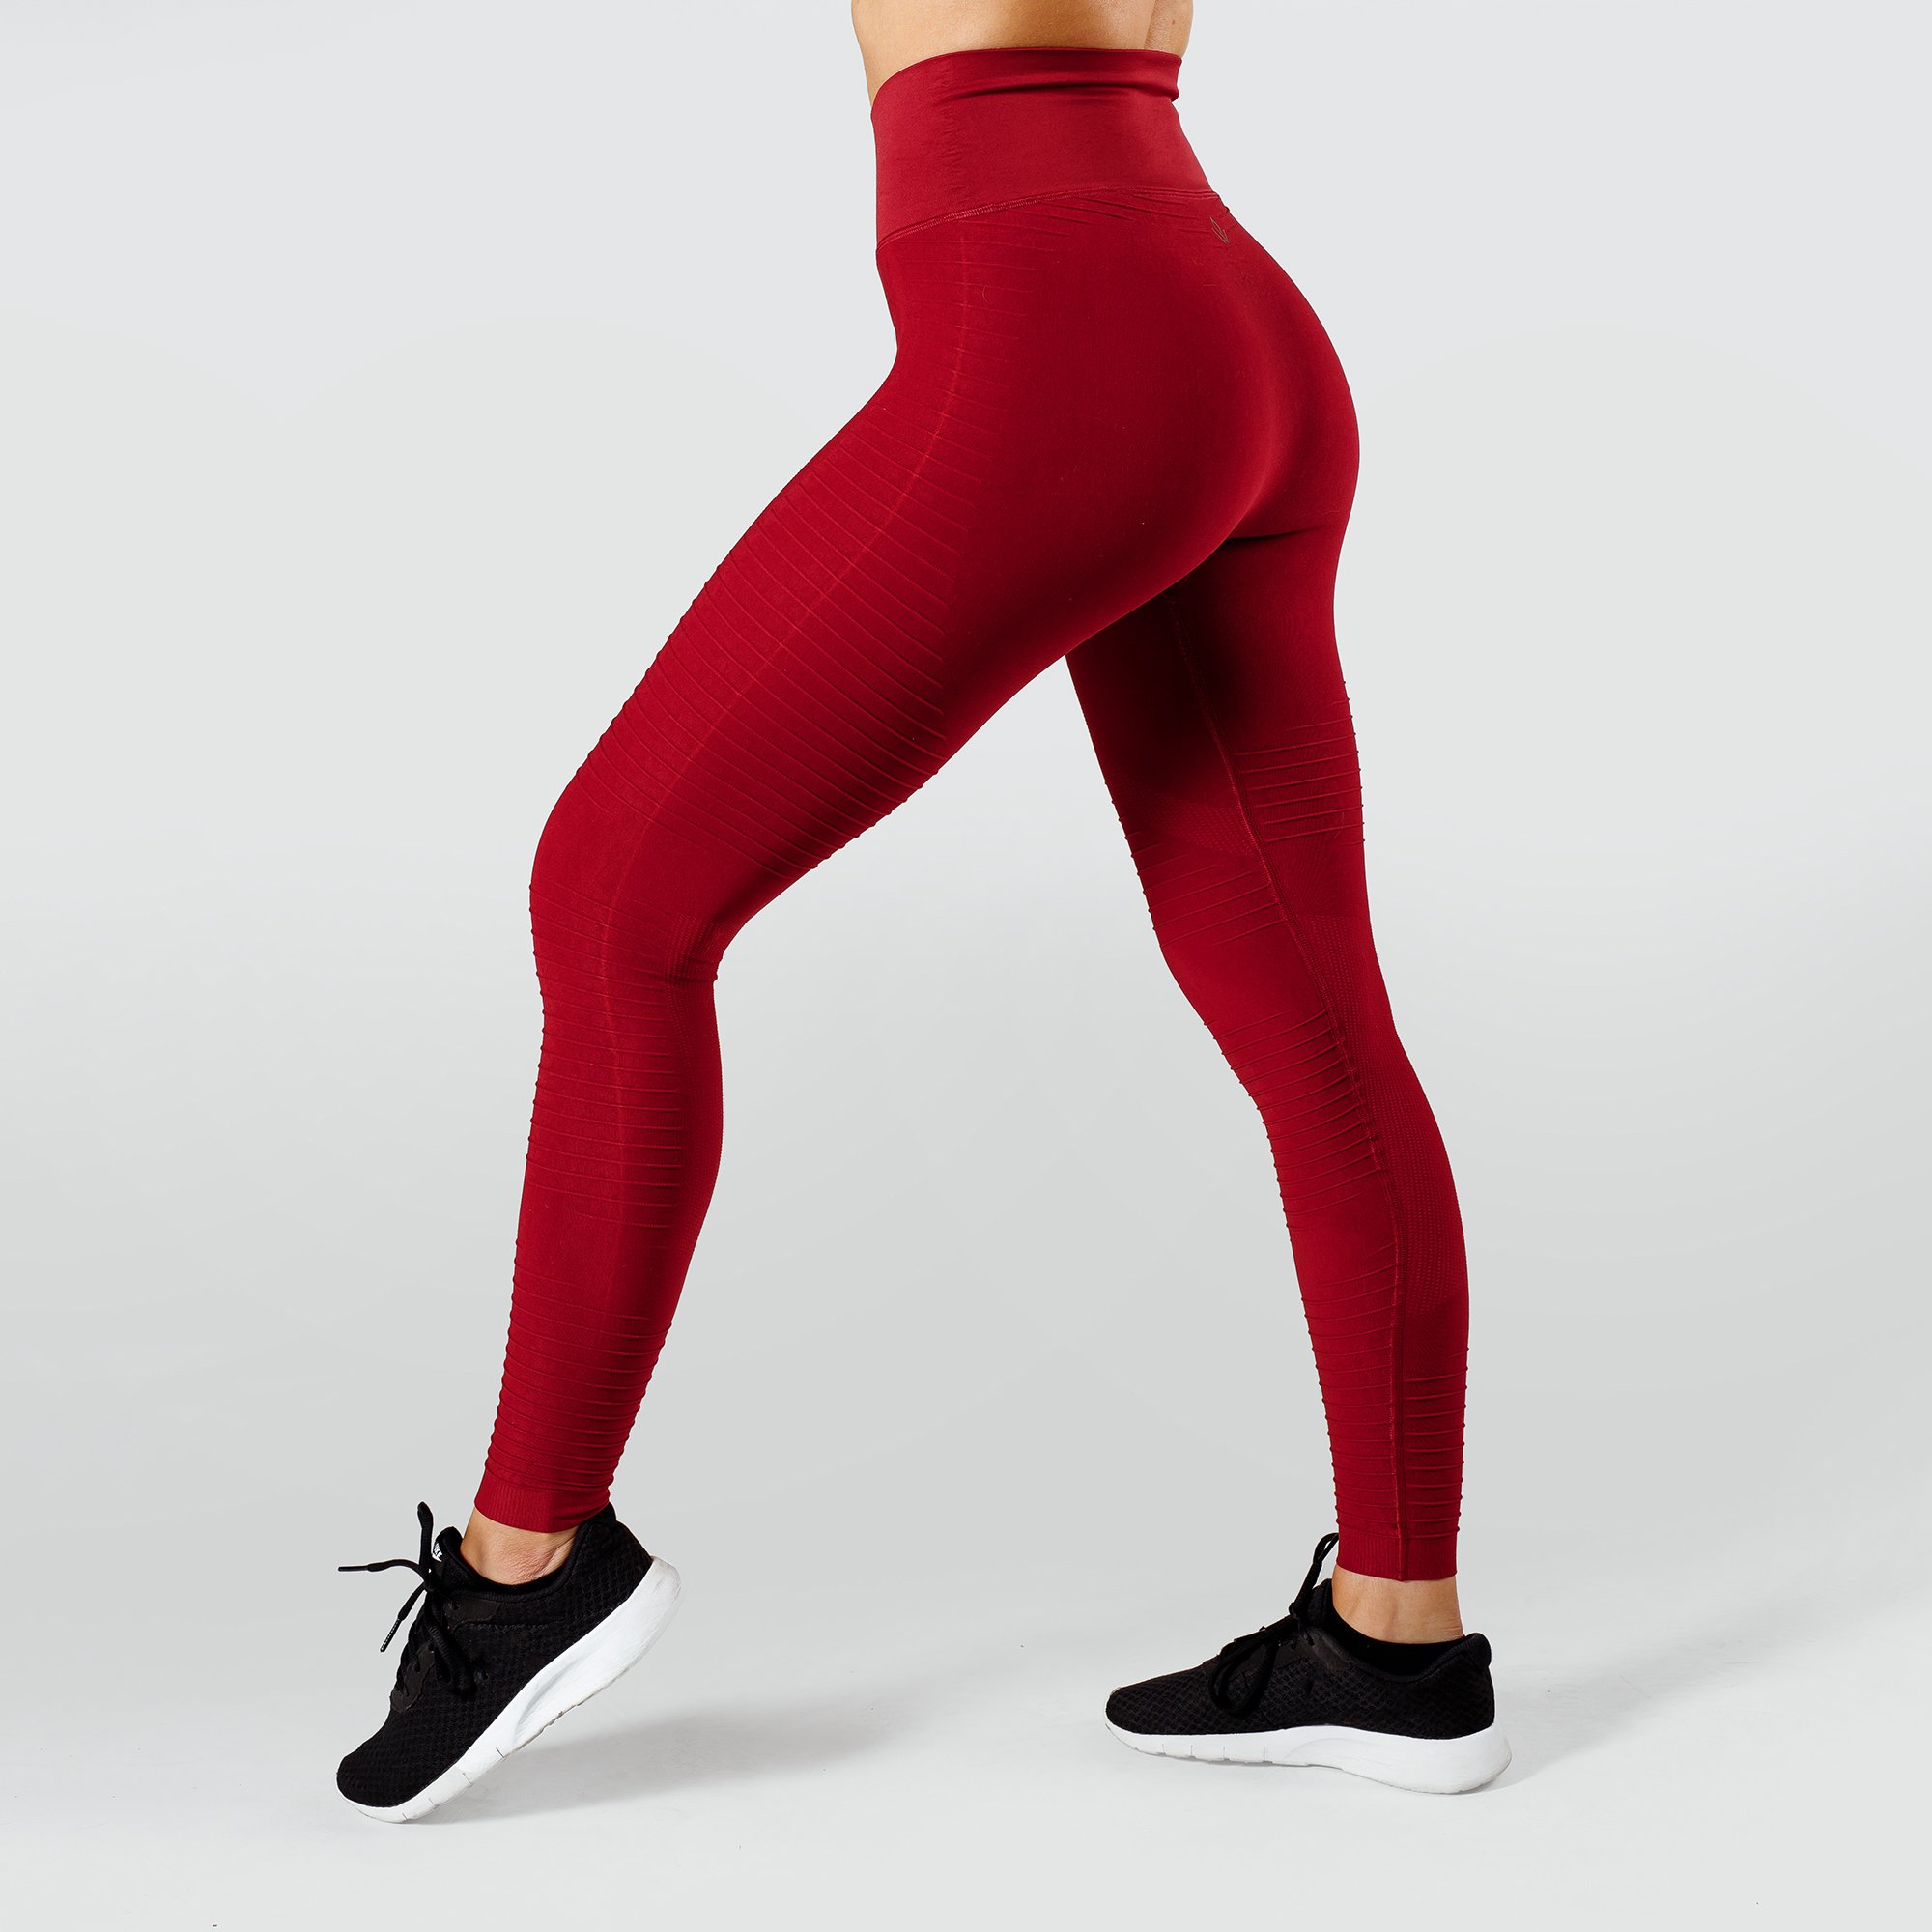 Hipkini Red Haute Legging  Fitness fashion, Red haute, Womens workout  outfits